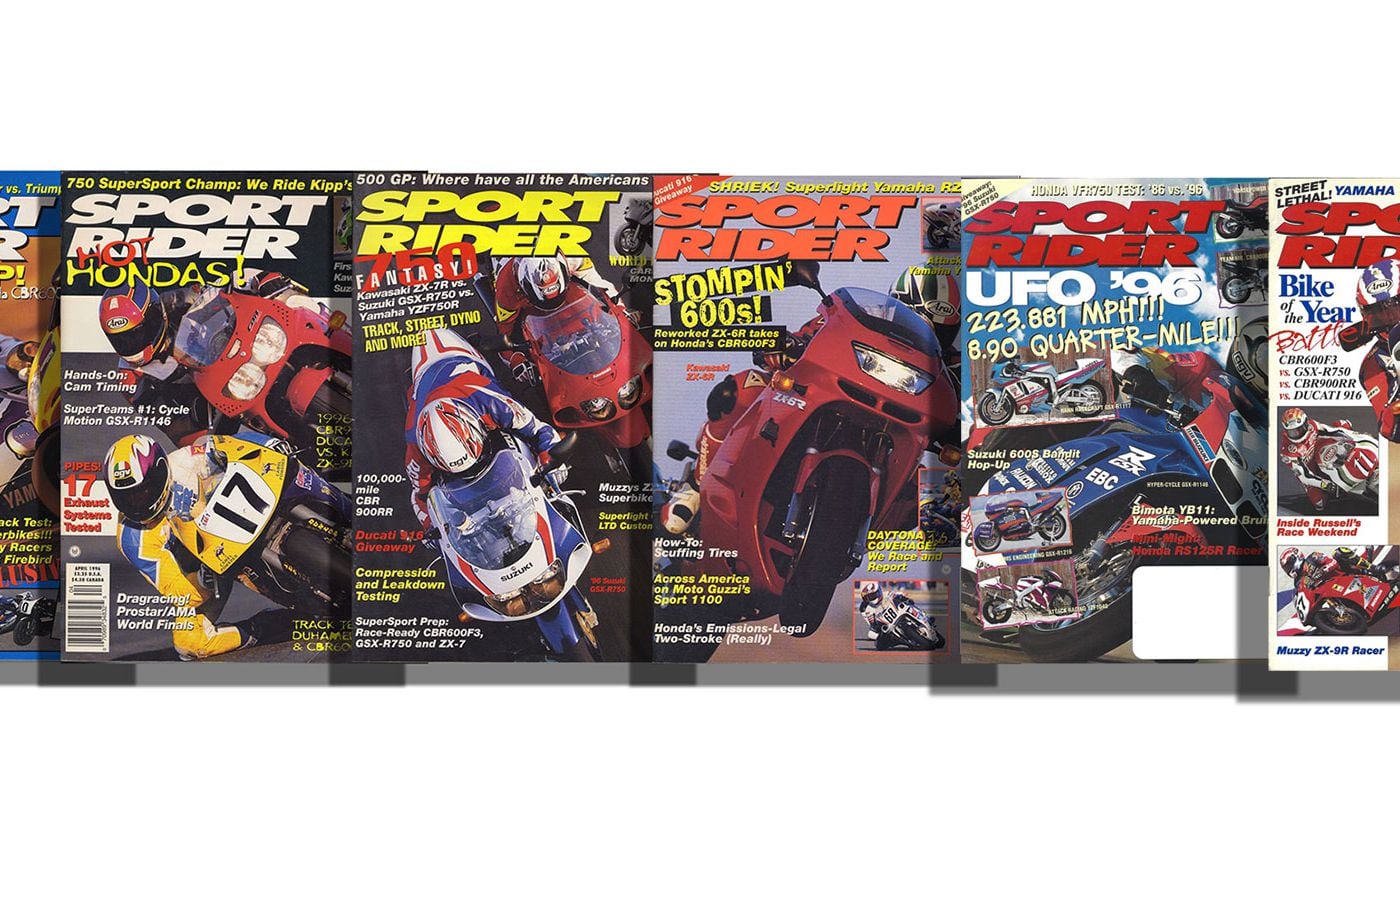 Sport Rider Covers From 1996 | Cycle World